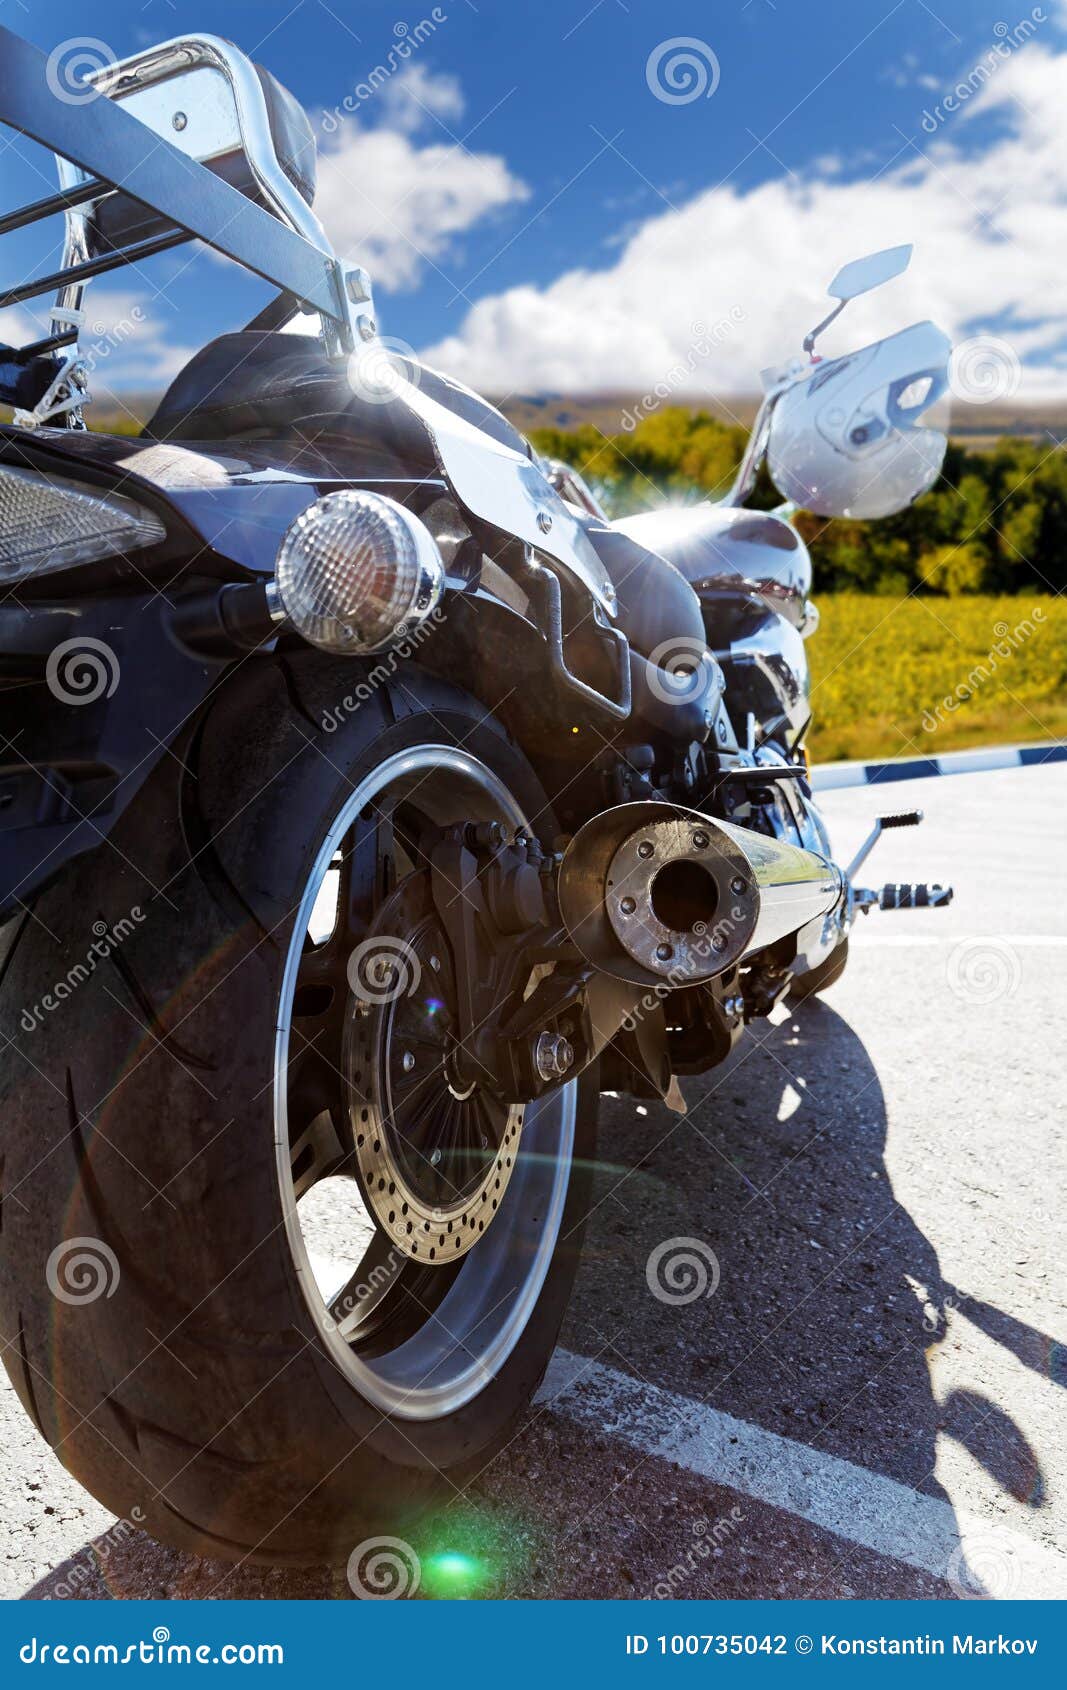 rear view on motorcicle against blue sky